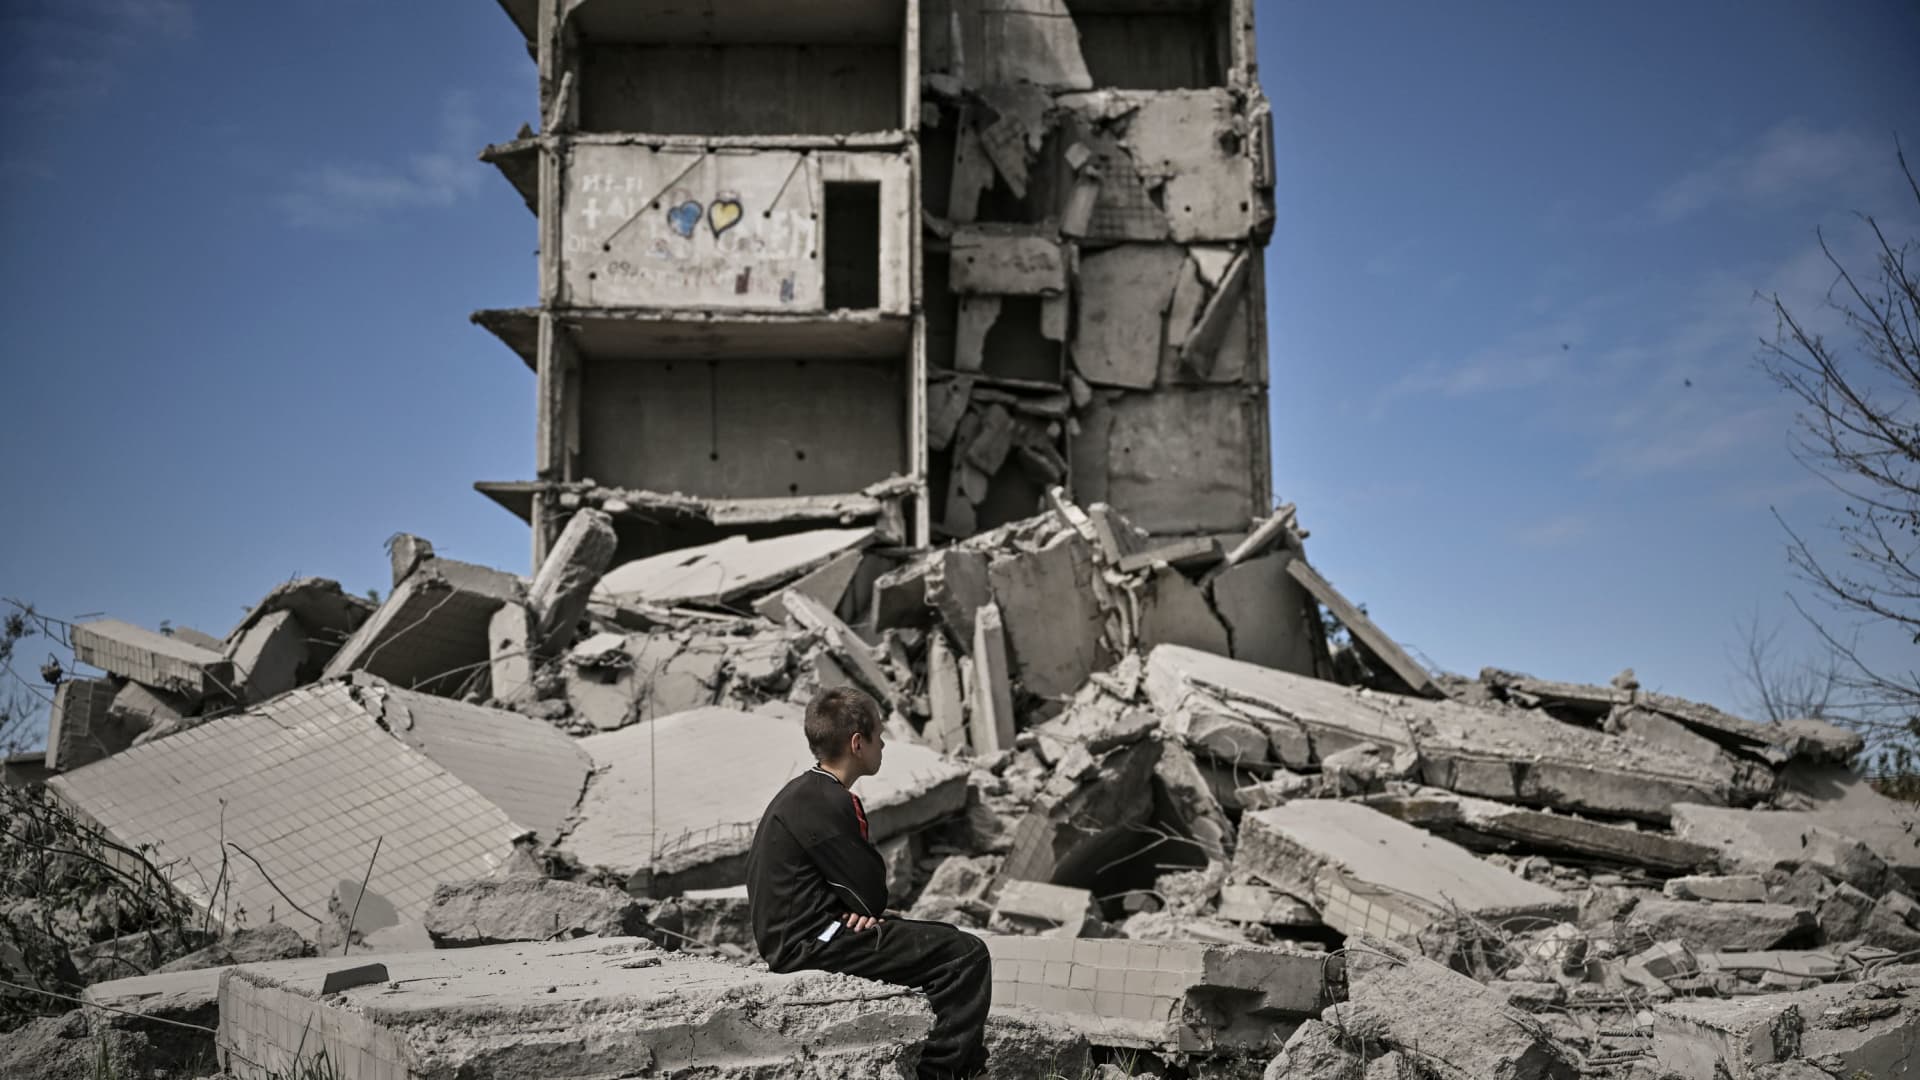 A young boy sits in front of a damaged building after a strike in Kramatorsk in the eastern Ukranian region of Donbas, on May 25, 2022.